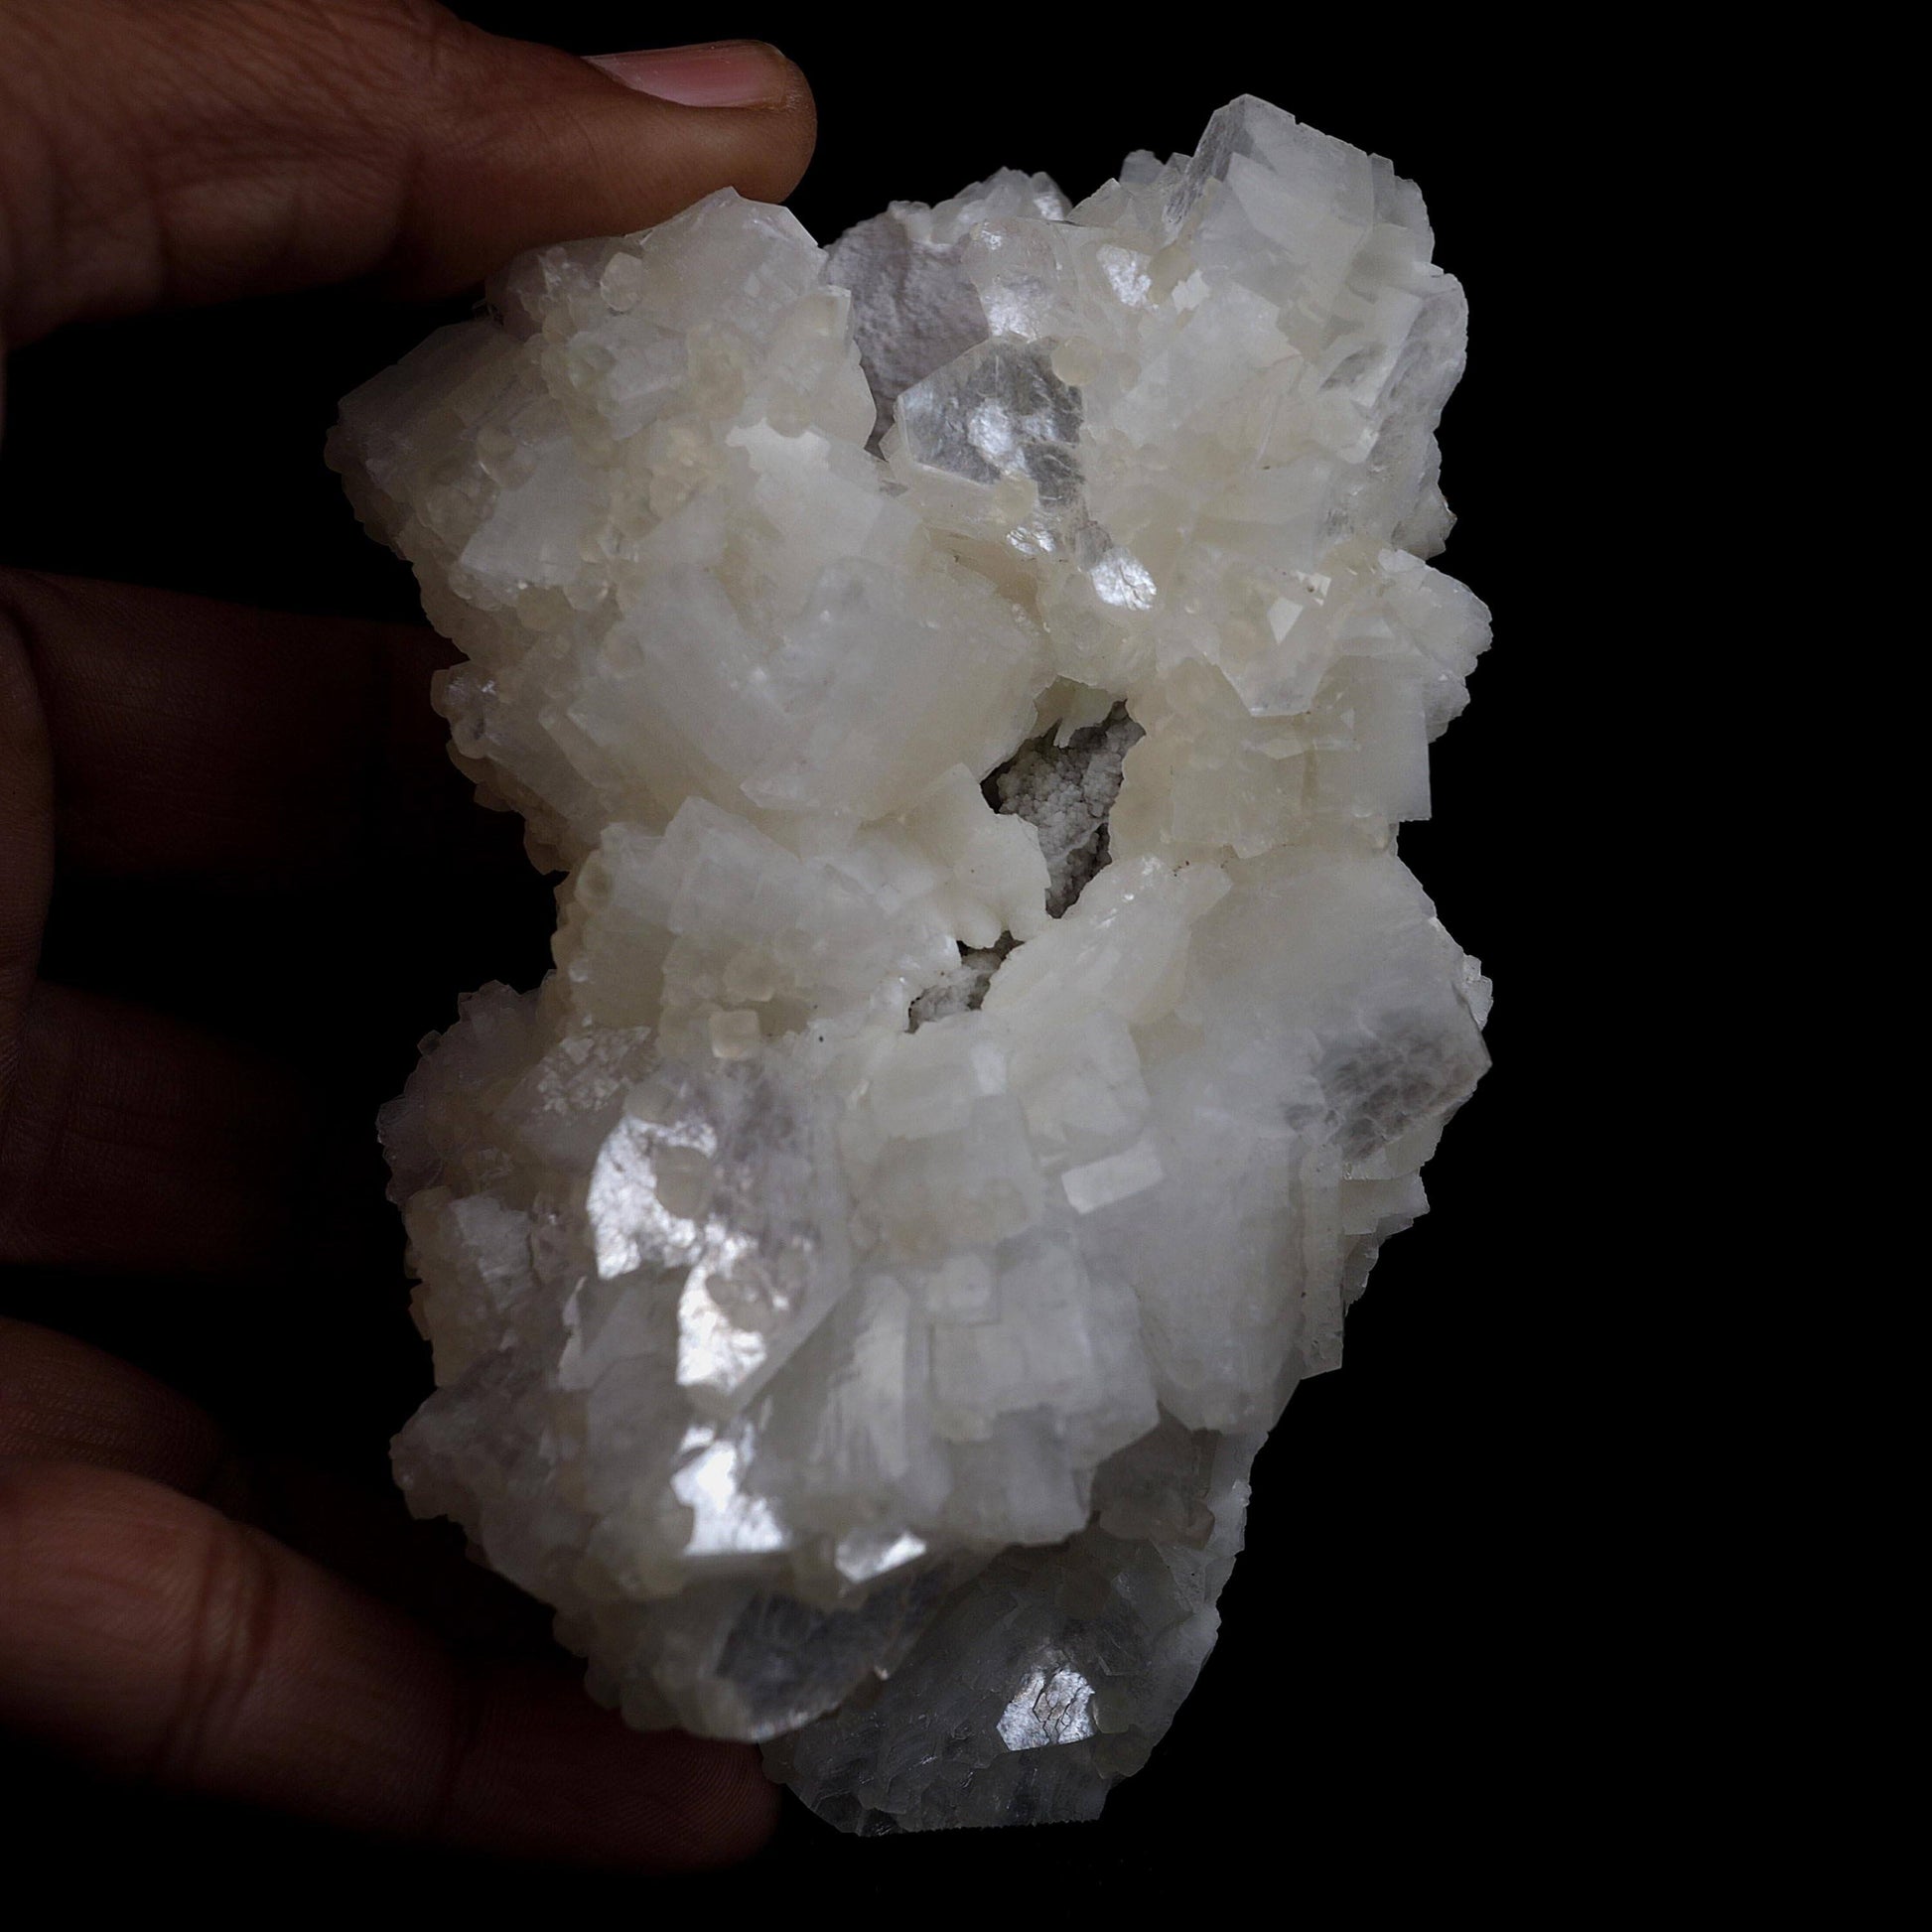 Heulandite, Calcite with Mordenite Natural Mineral Specimen # B 4510  https://www.superbminerals.us/products/heulandite-calcite-with-mordenite-natural-mineral-specimen-b-4510  Features:Calcite tabular crystals and mordenite crystals form a unique relationship over a bed of heulandite crystals that cover the whole cavity. It was found in Maharashtra, India, in a basalt pocket. Primary Mineral(s): HeulanditeSecondary Mineral(s): Calcite, MordeniteMatrix: N/A11 cm x 6 cmWeight : 270 Gms